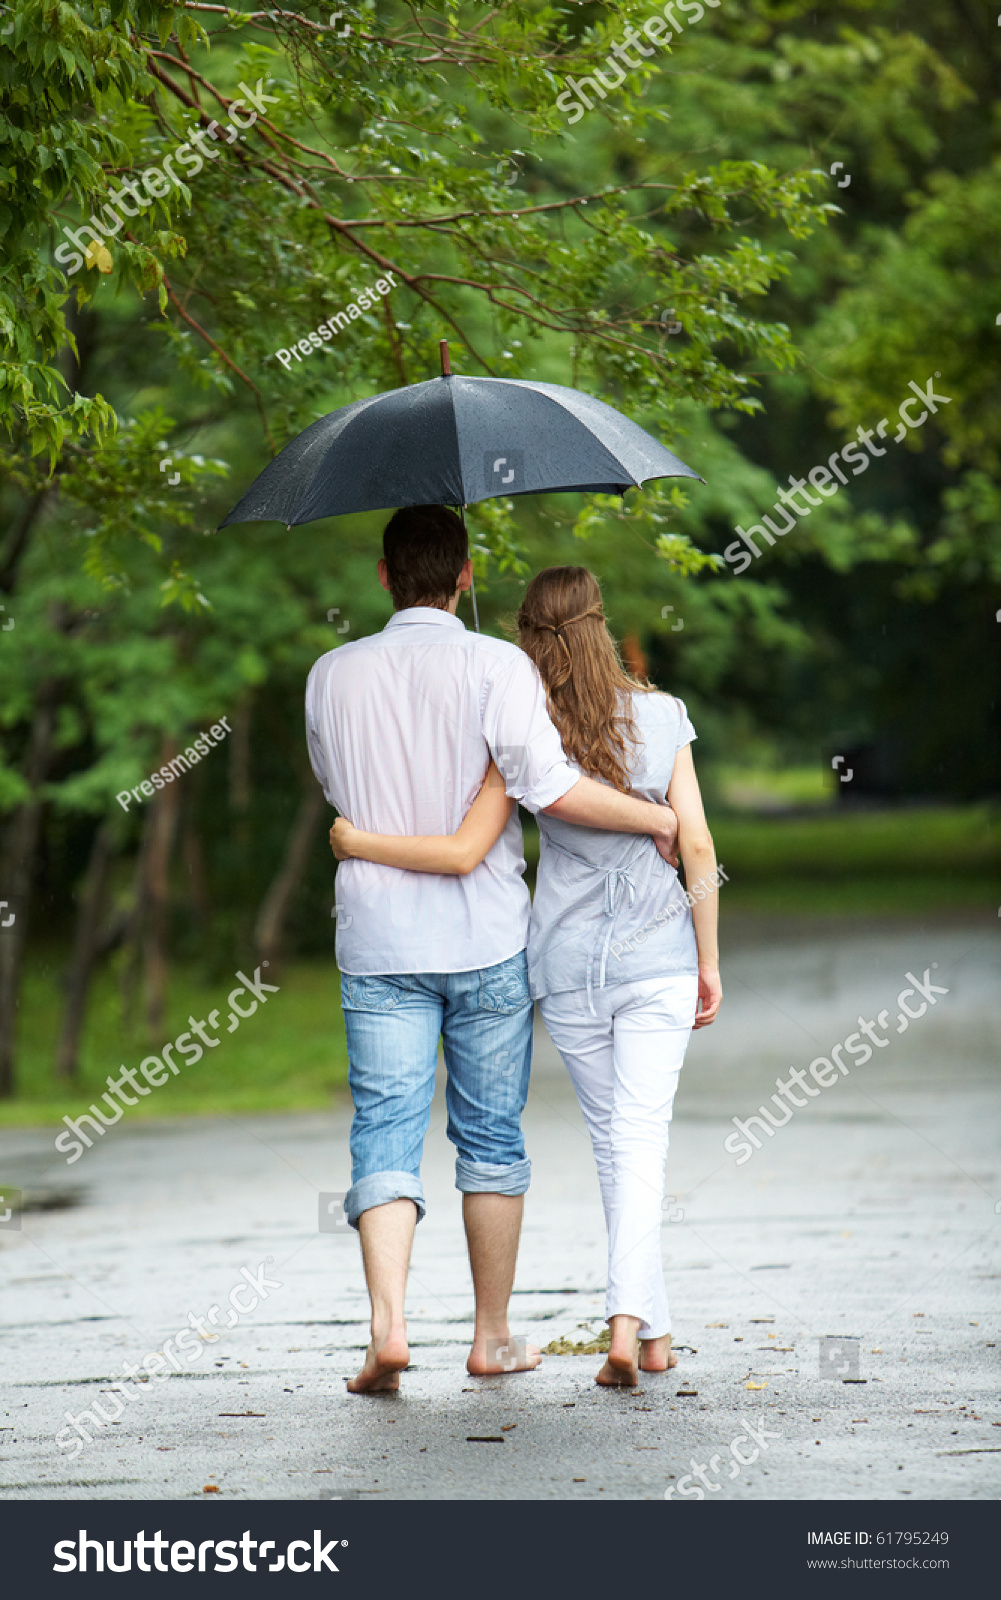 Image result for a couple walking inside with the umbrella/